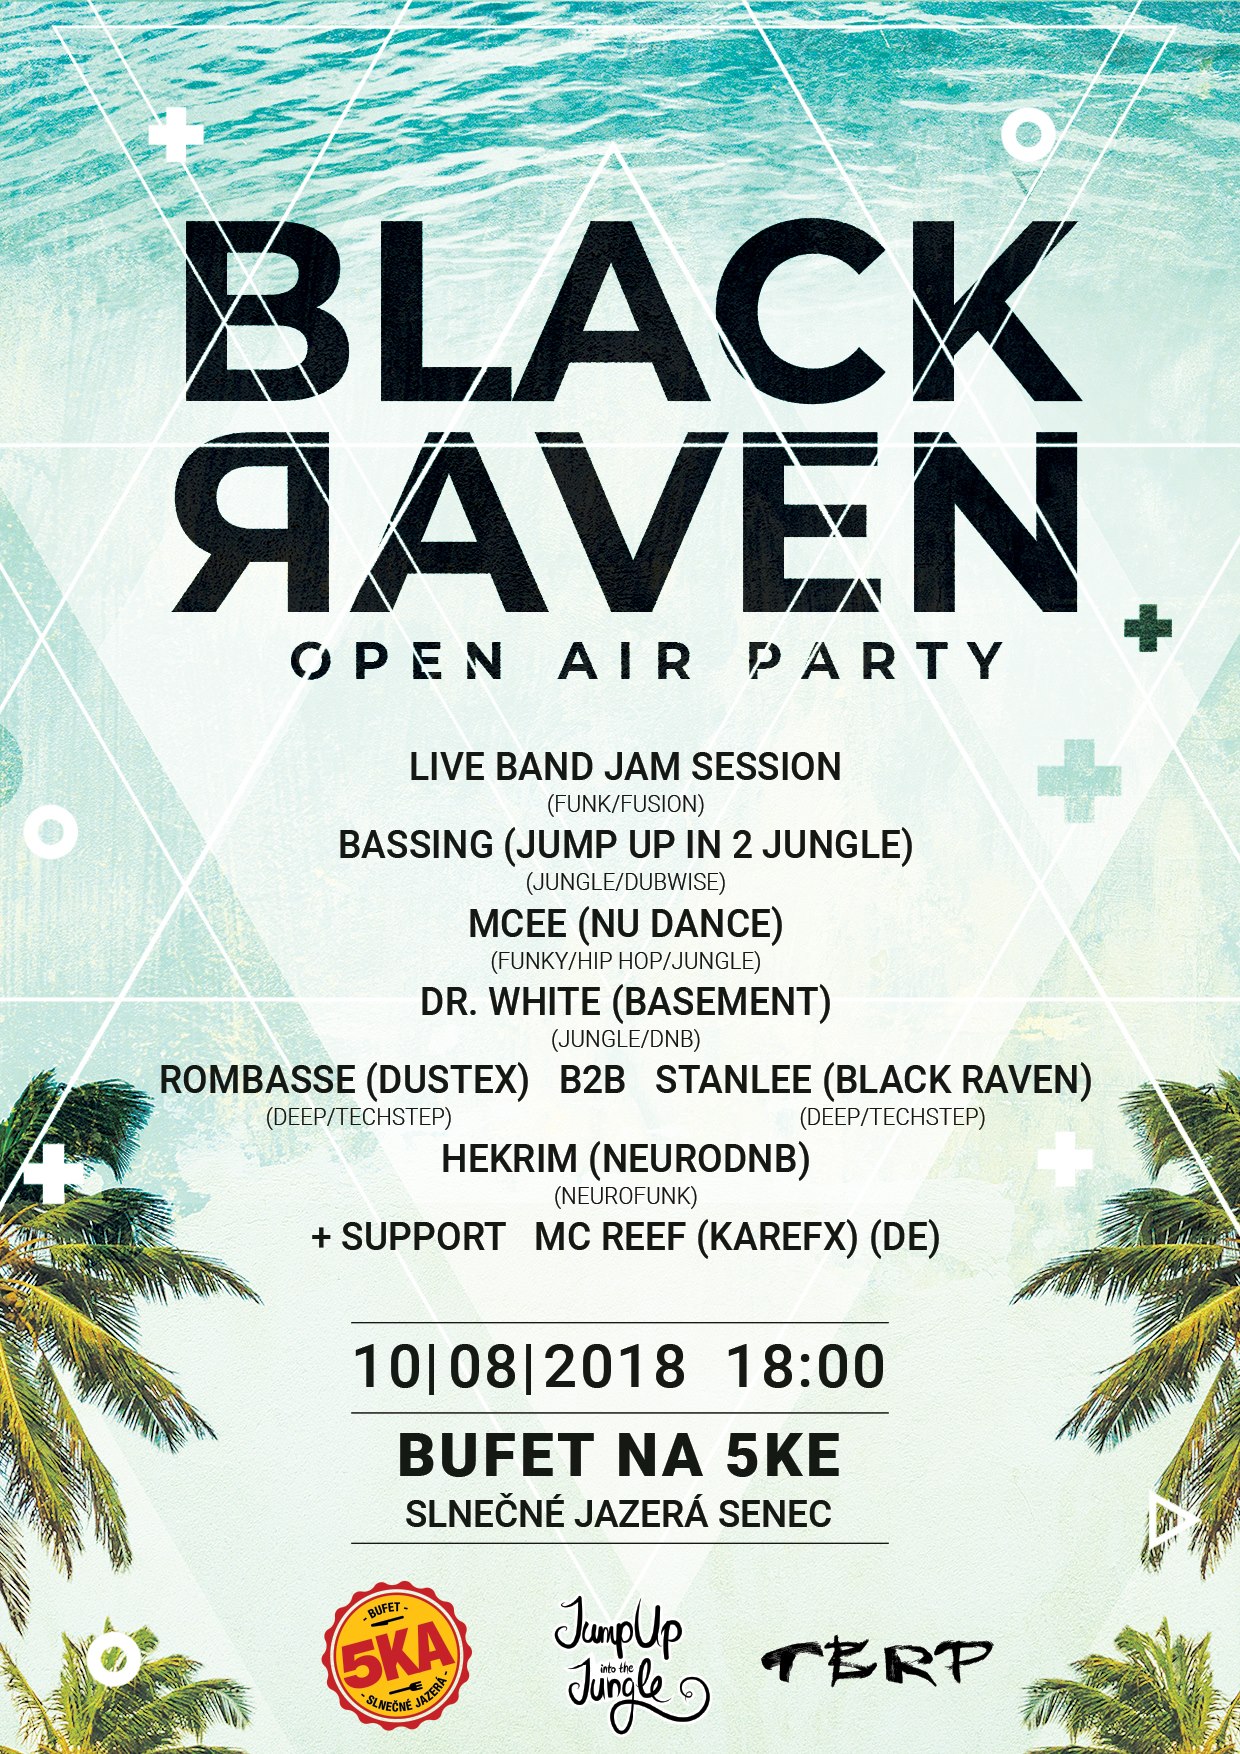 The Black Raven Project Open Air Party